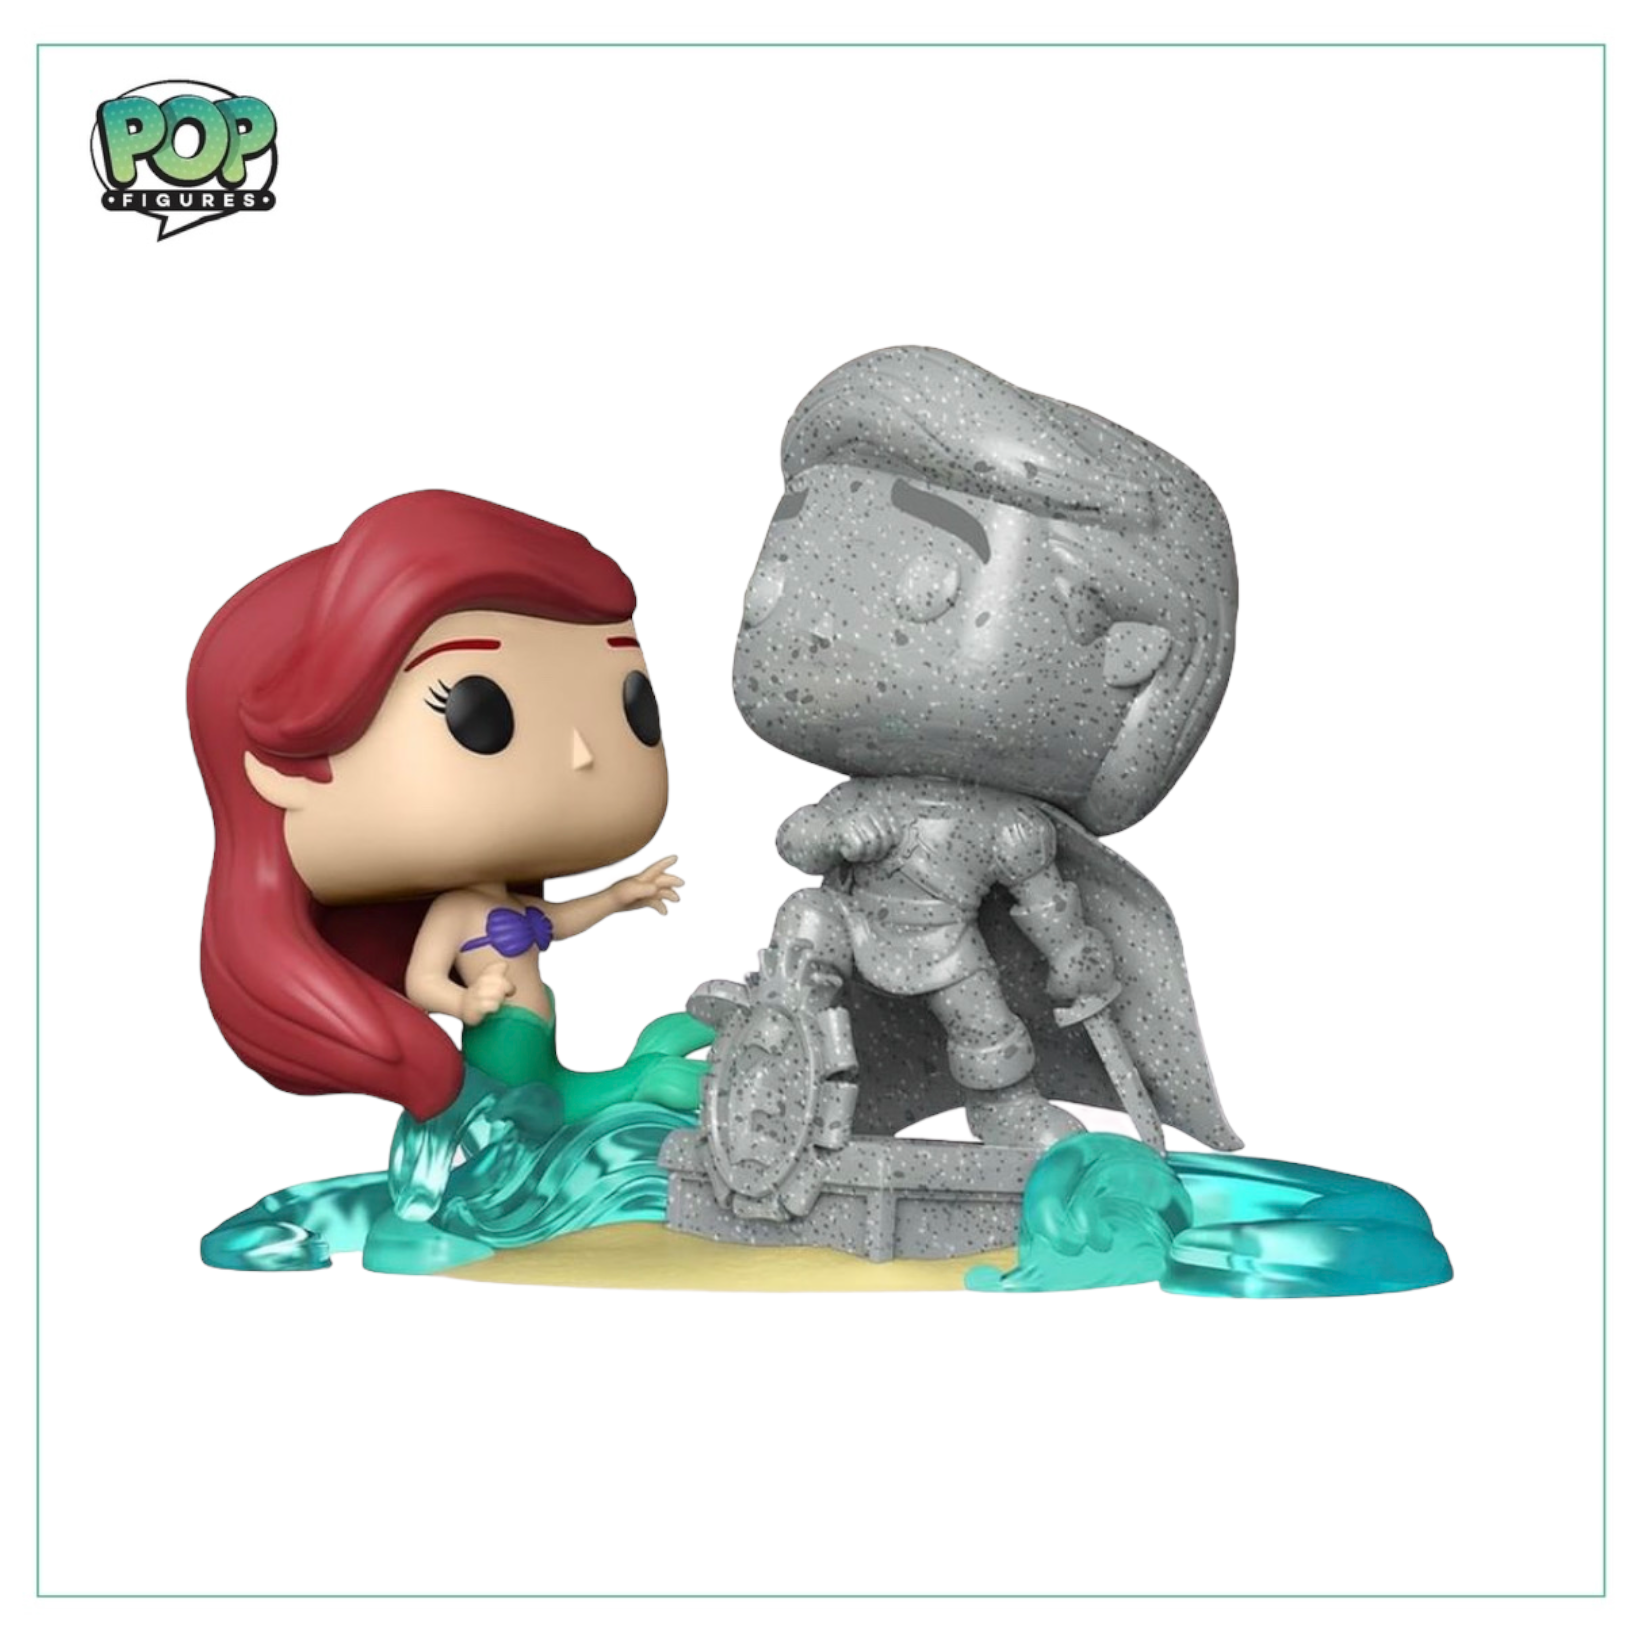 Ariel with Eric statue #1169 Deluxe Funko Pop! Disney - Boxlunch Exclusive